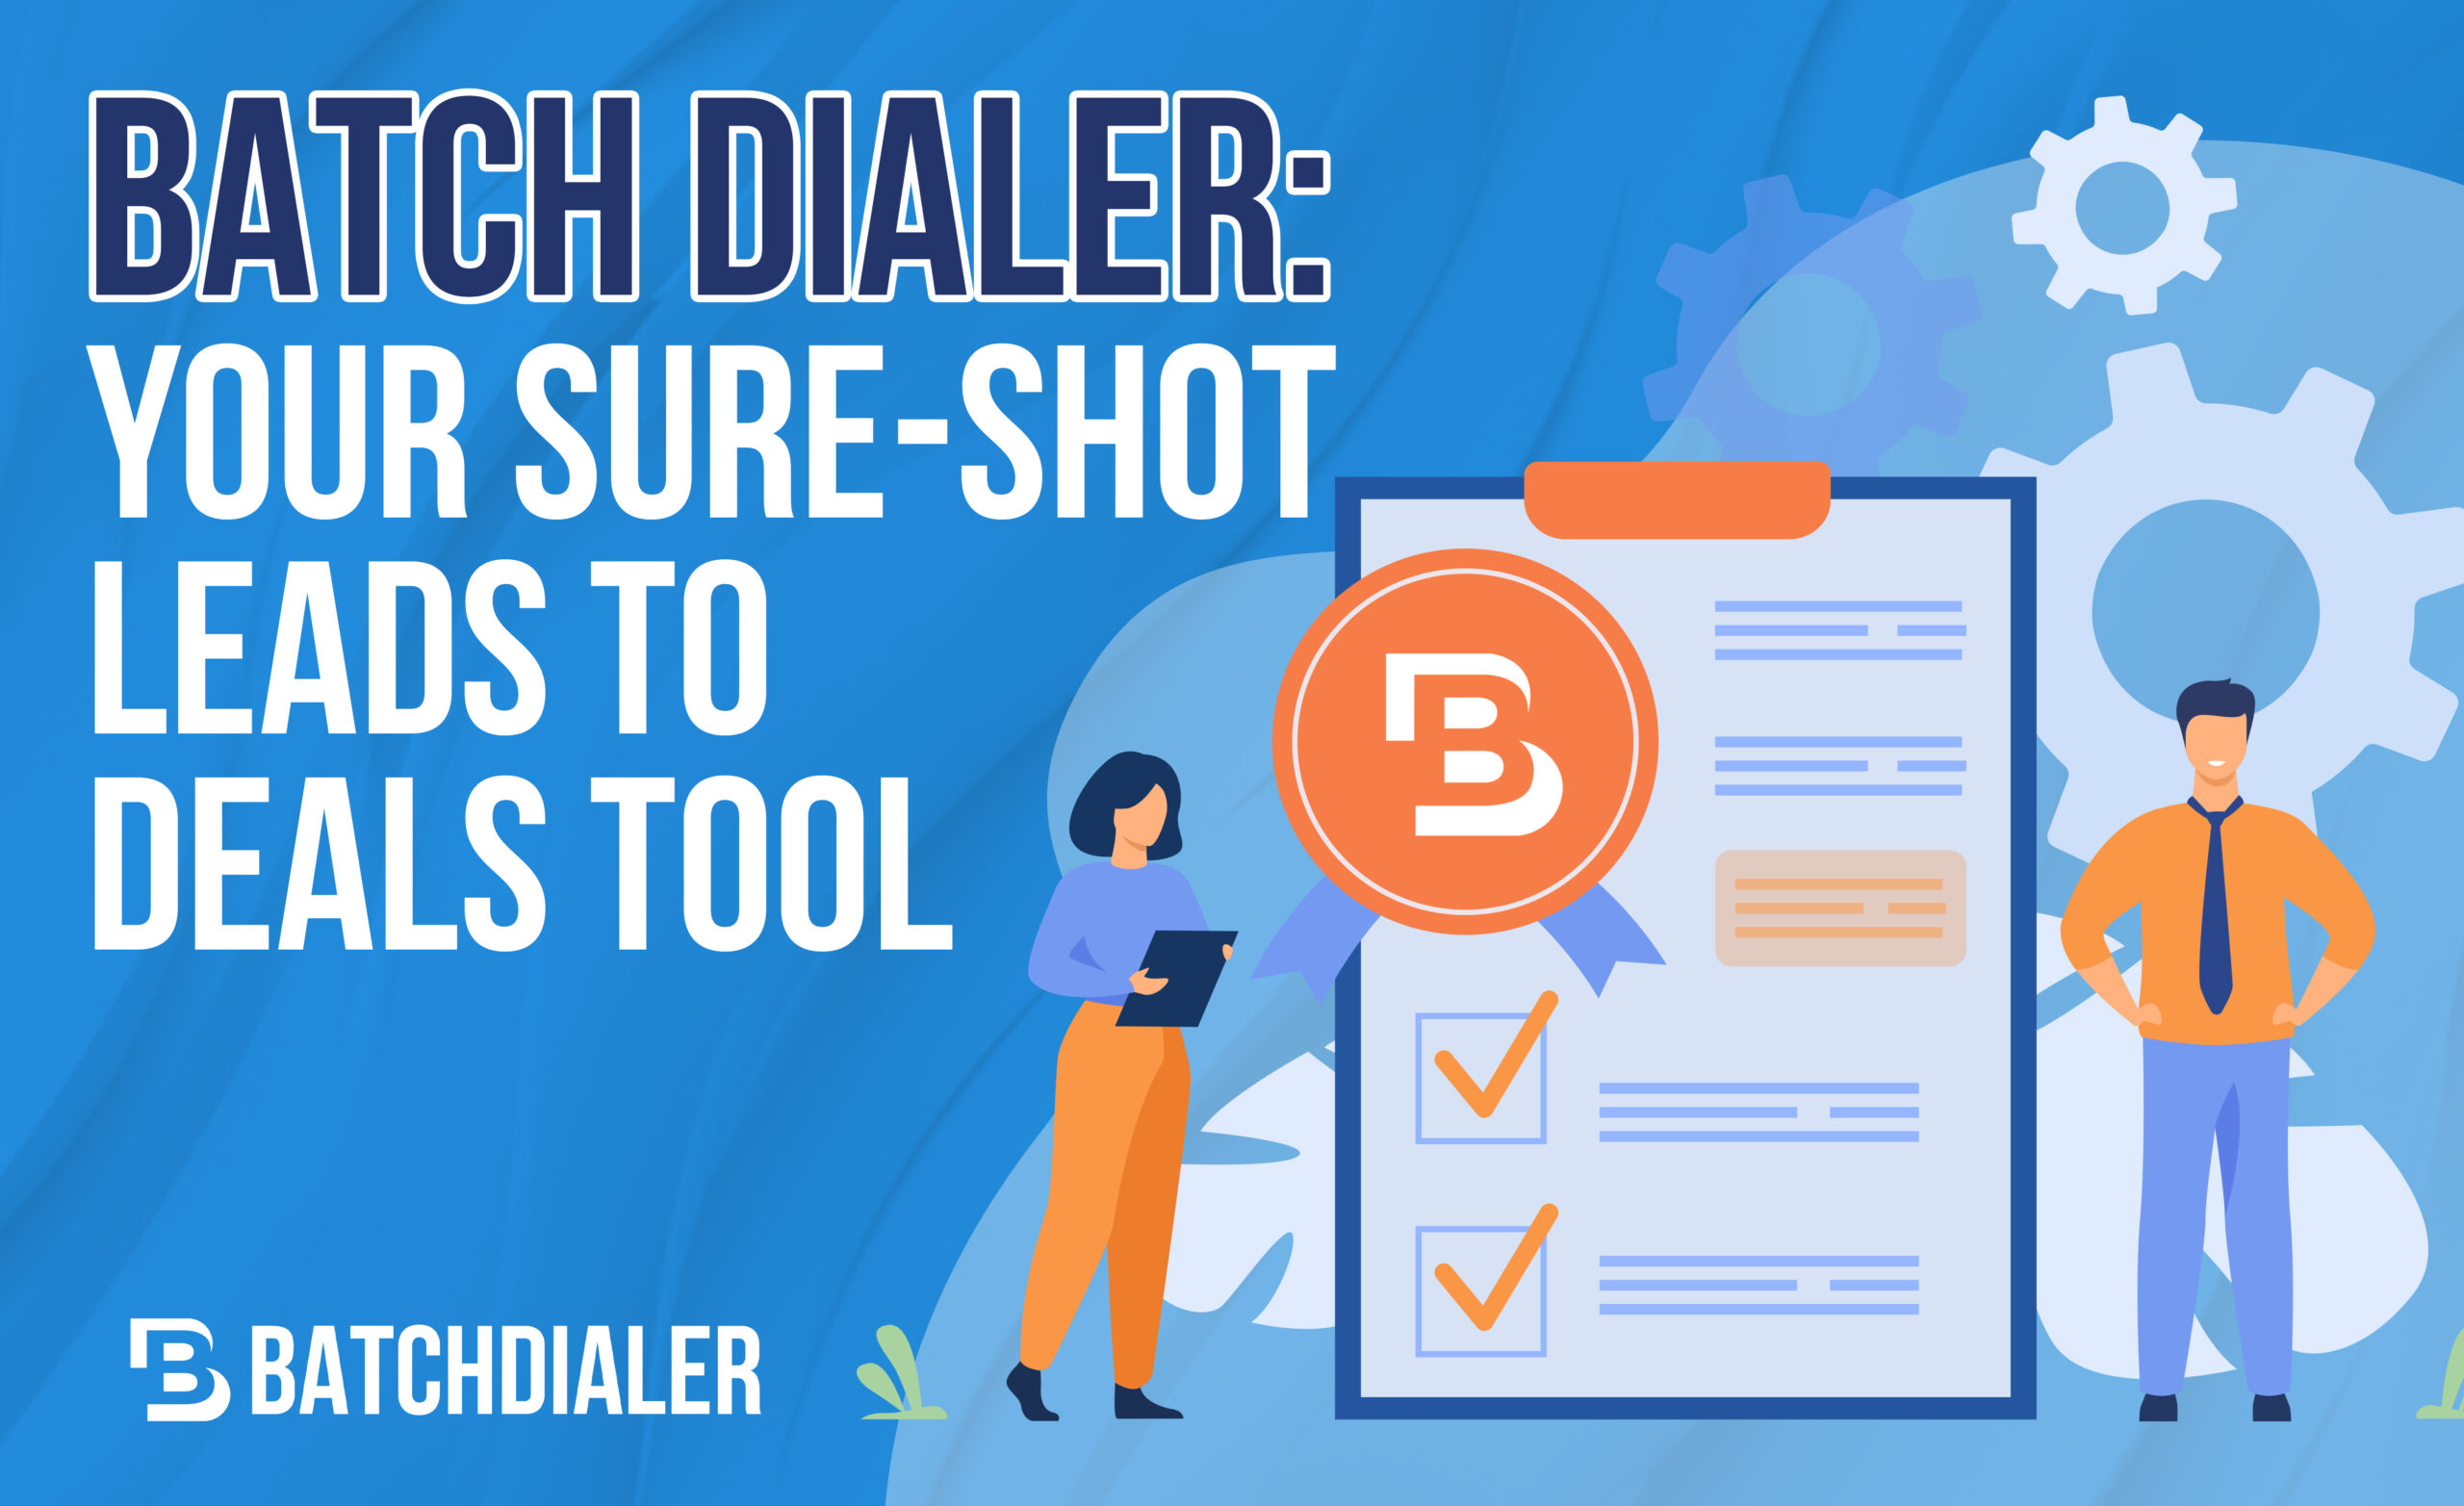 BATCH DIALER YOUR SURE-SHOT LEADS TO DEALS TOOL